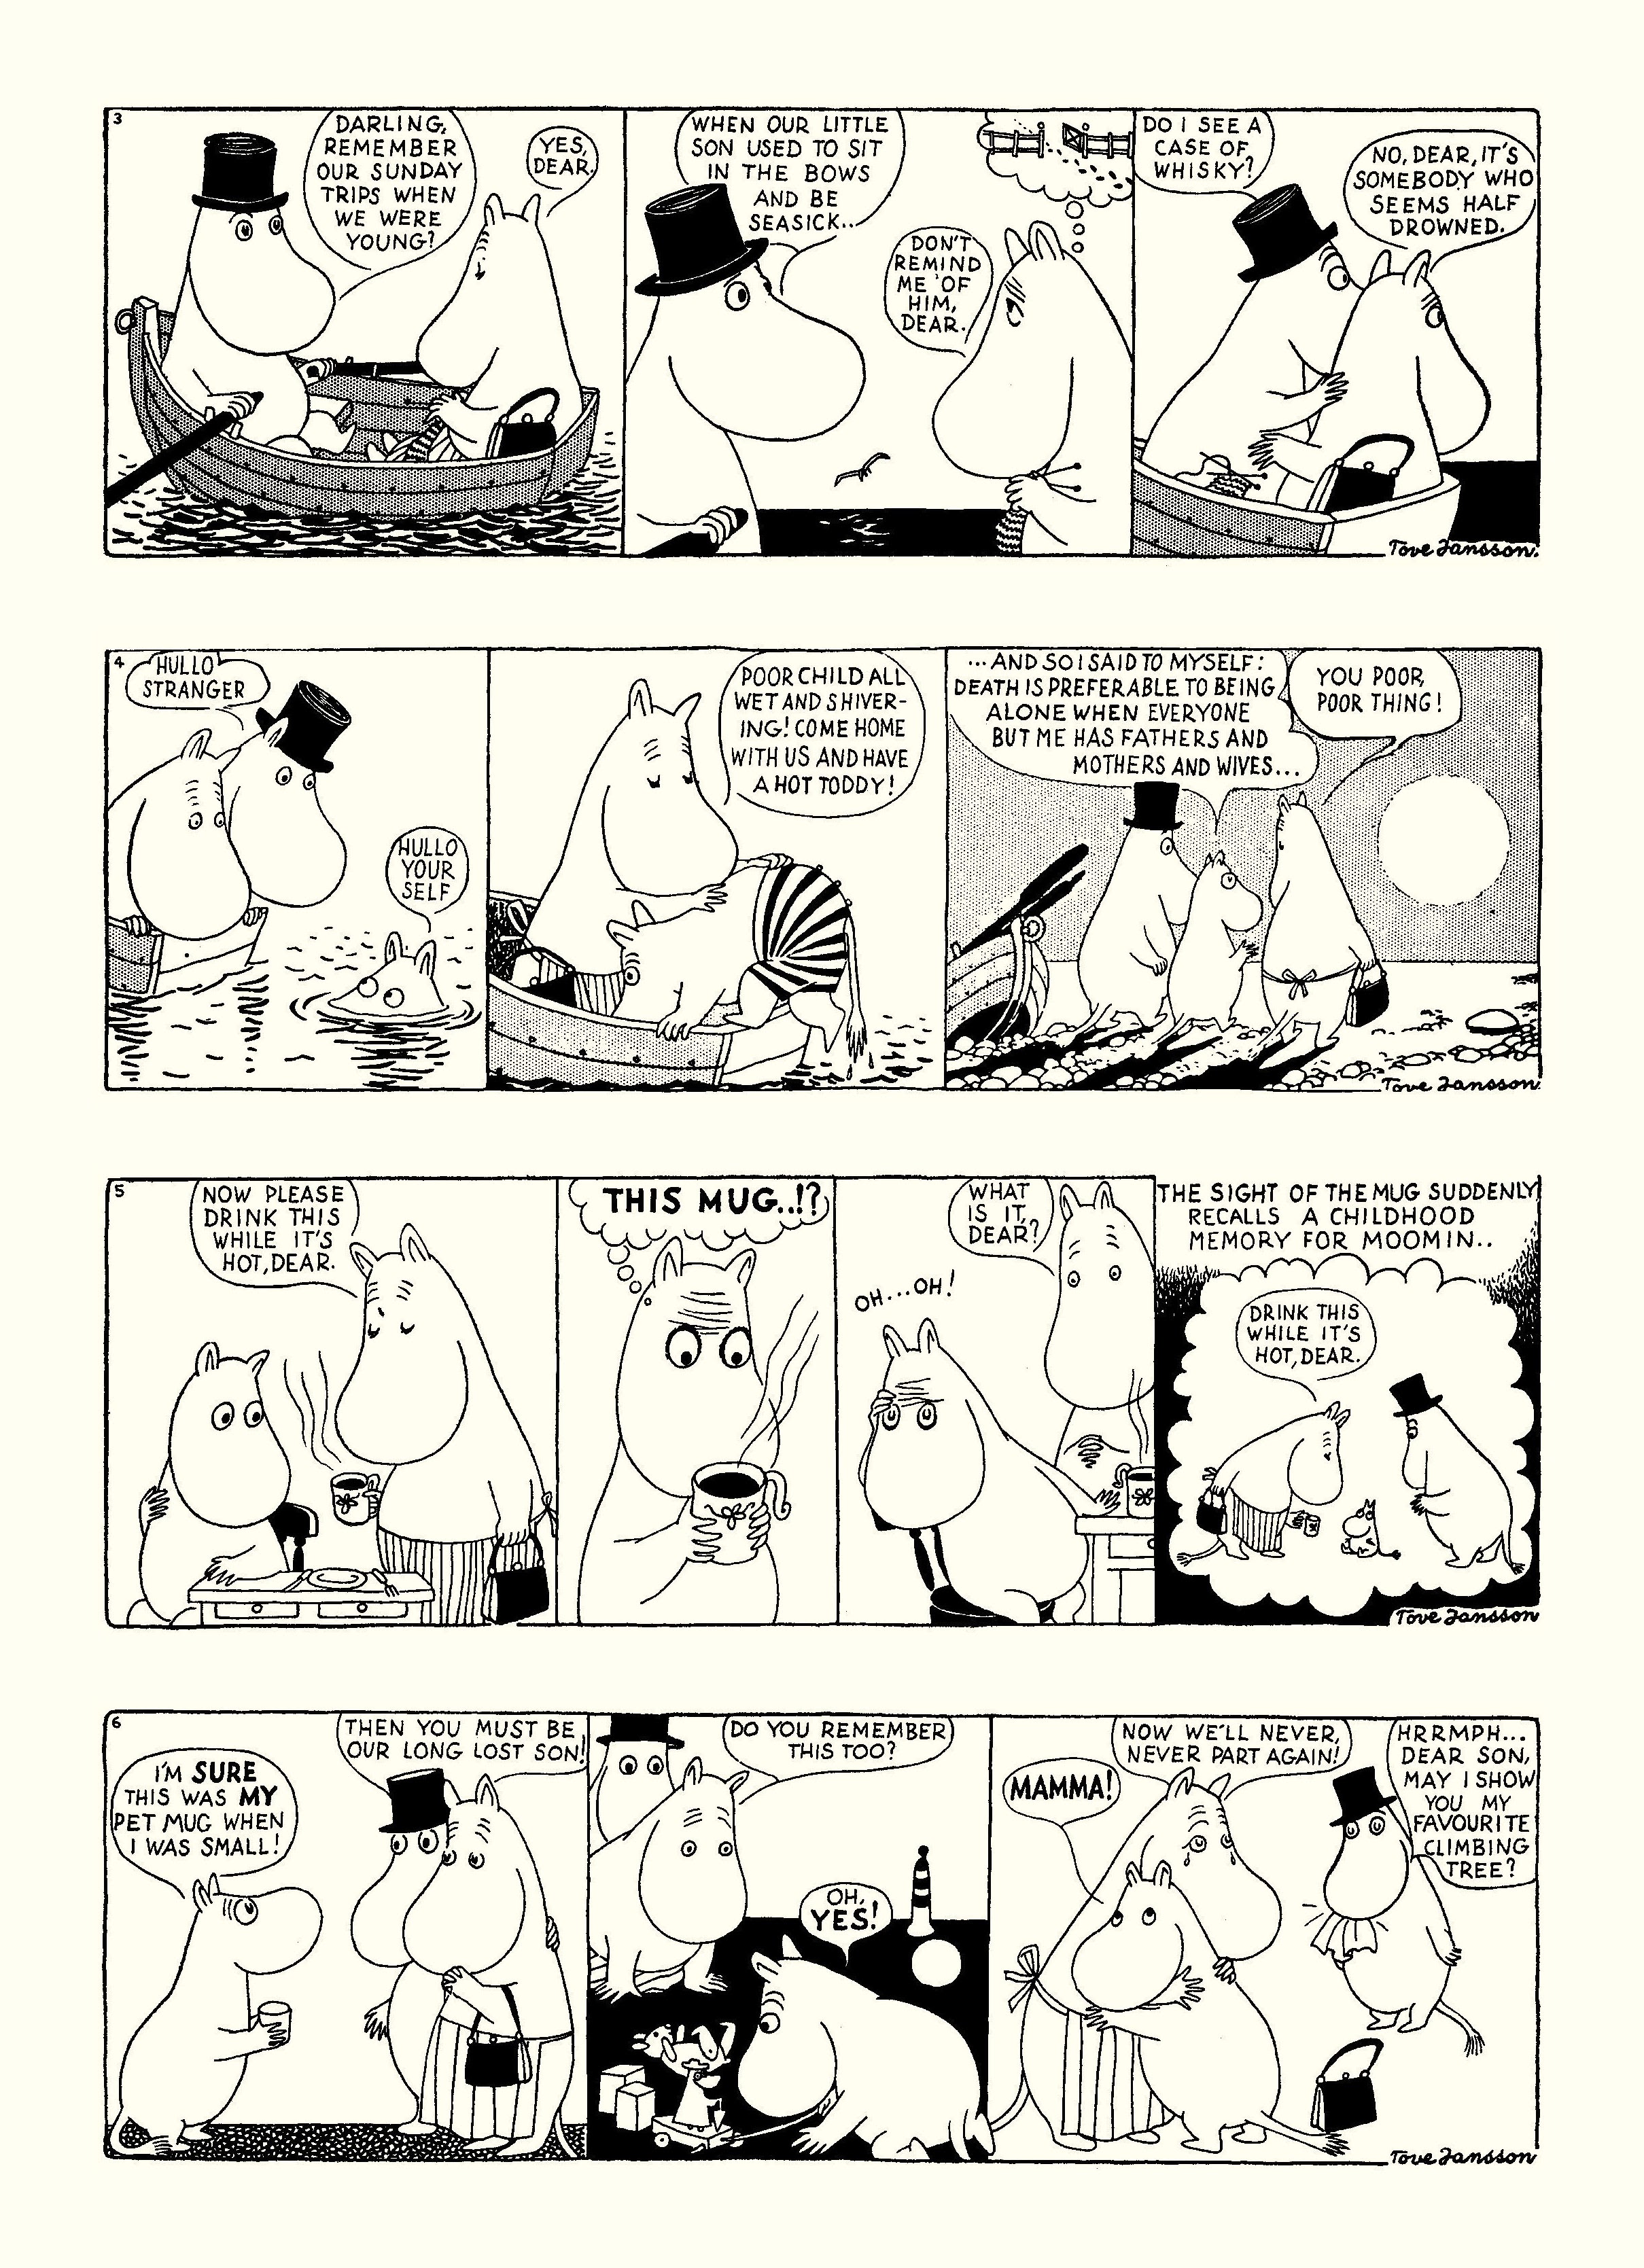 Read online Moomin: The Complete Tove Jansson Comic Strip comic -  Issue # TPB 1 - 31